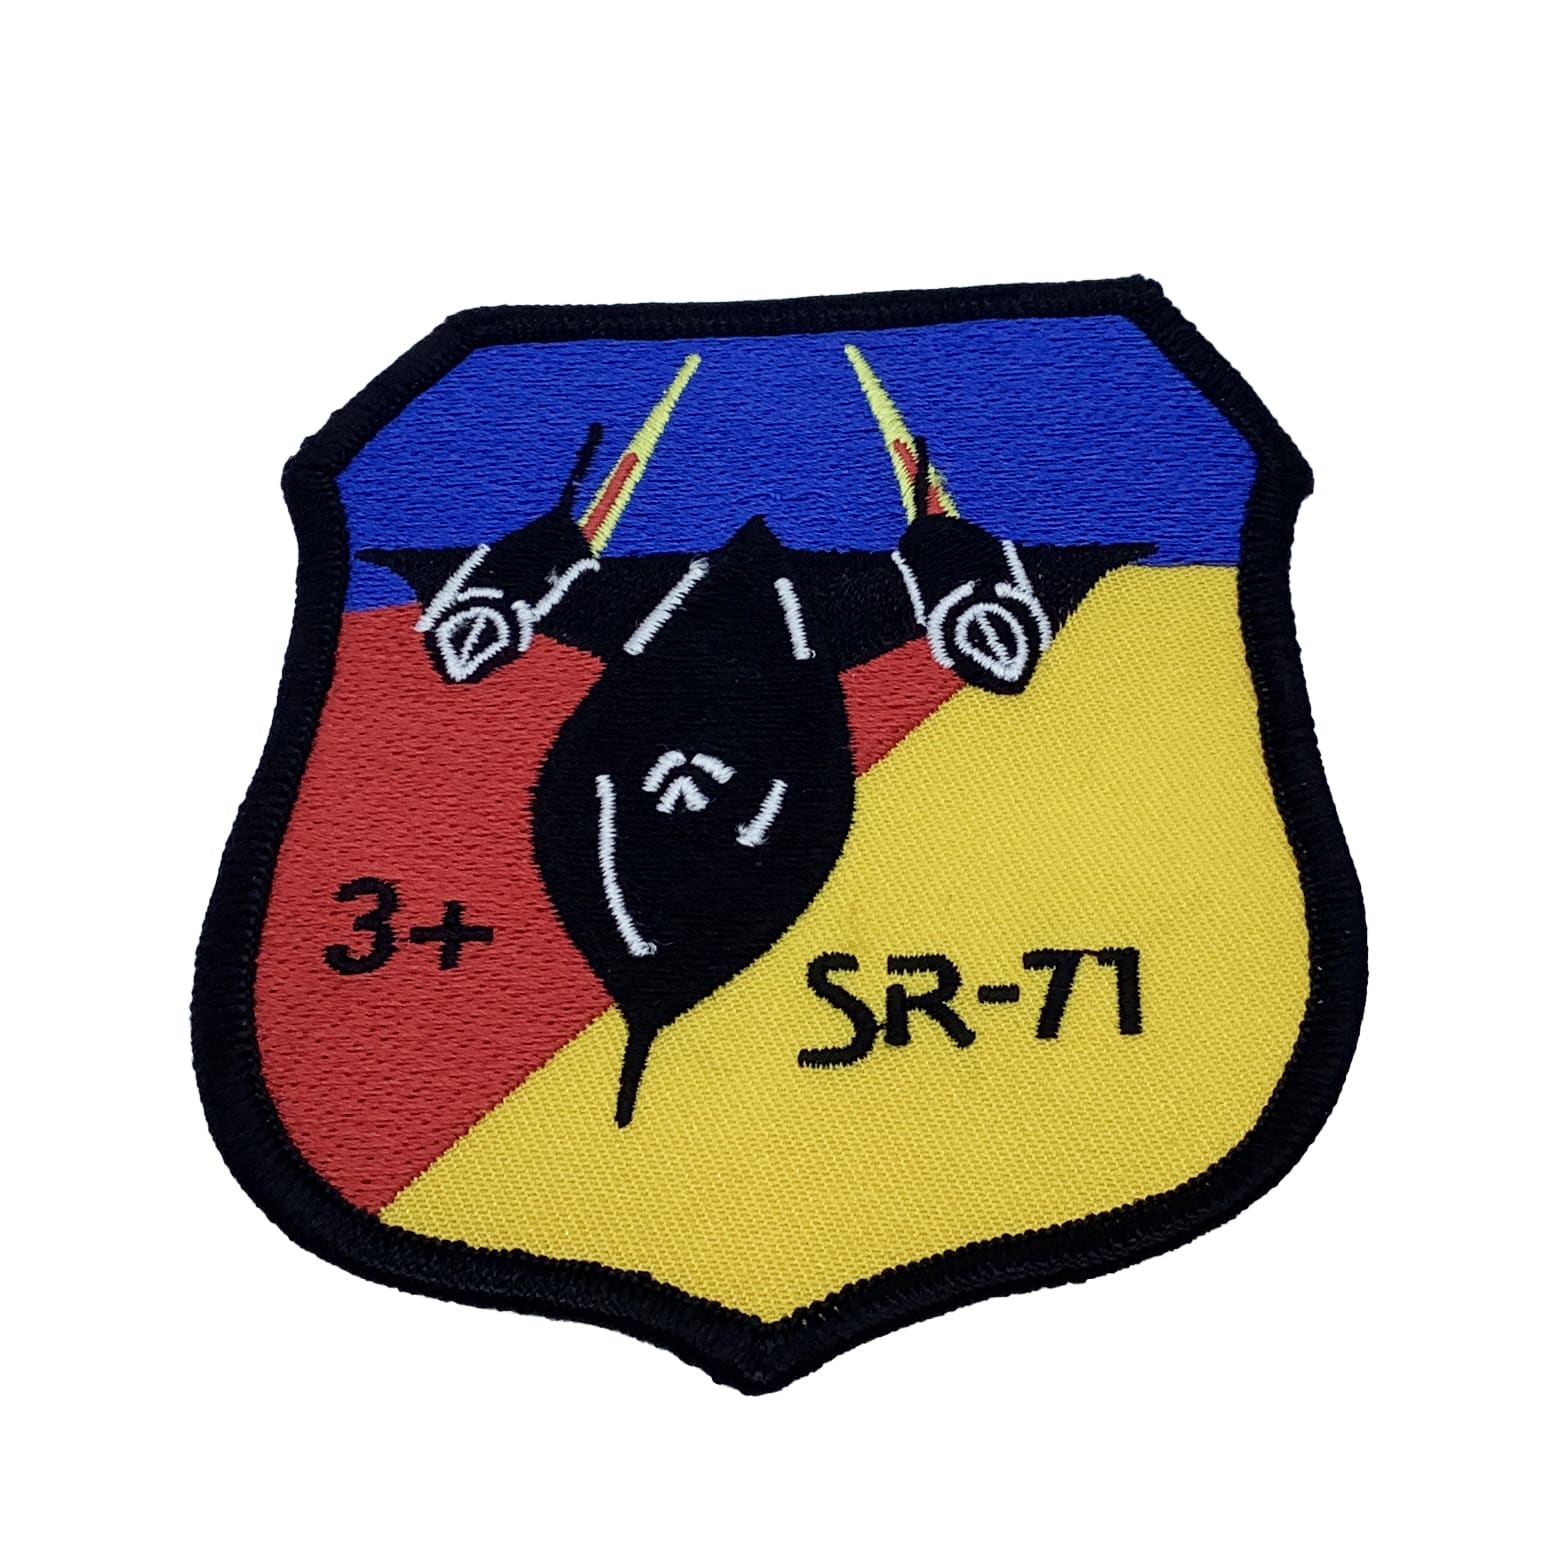 MARCH 3 SR-71 Patch – Plastic Backing